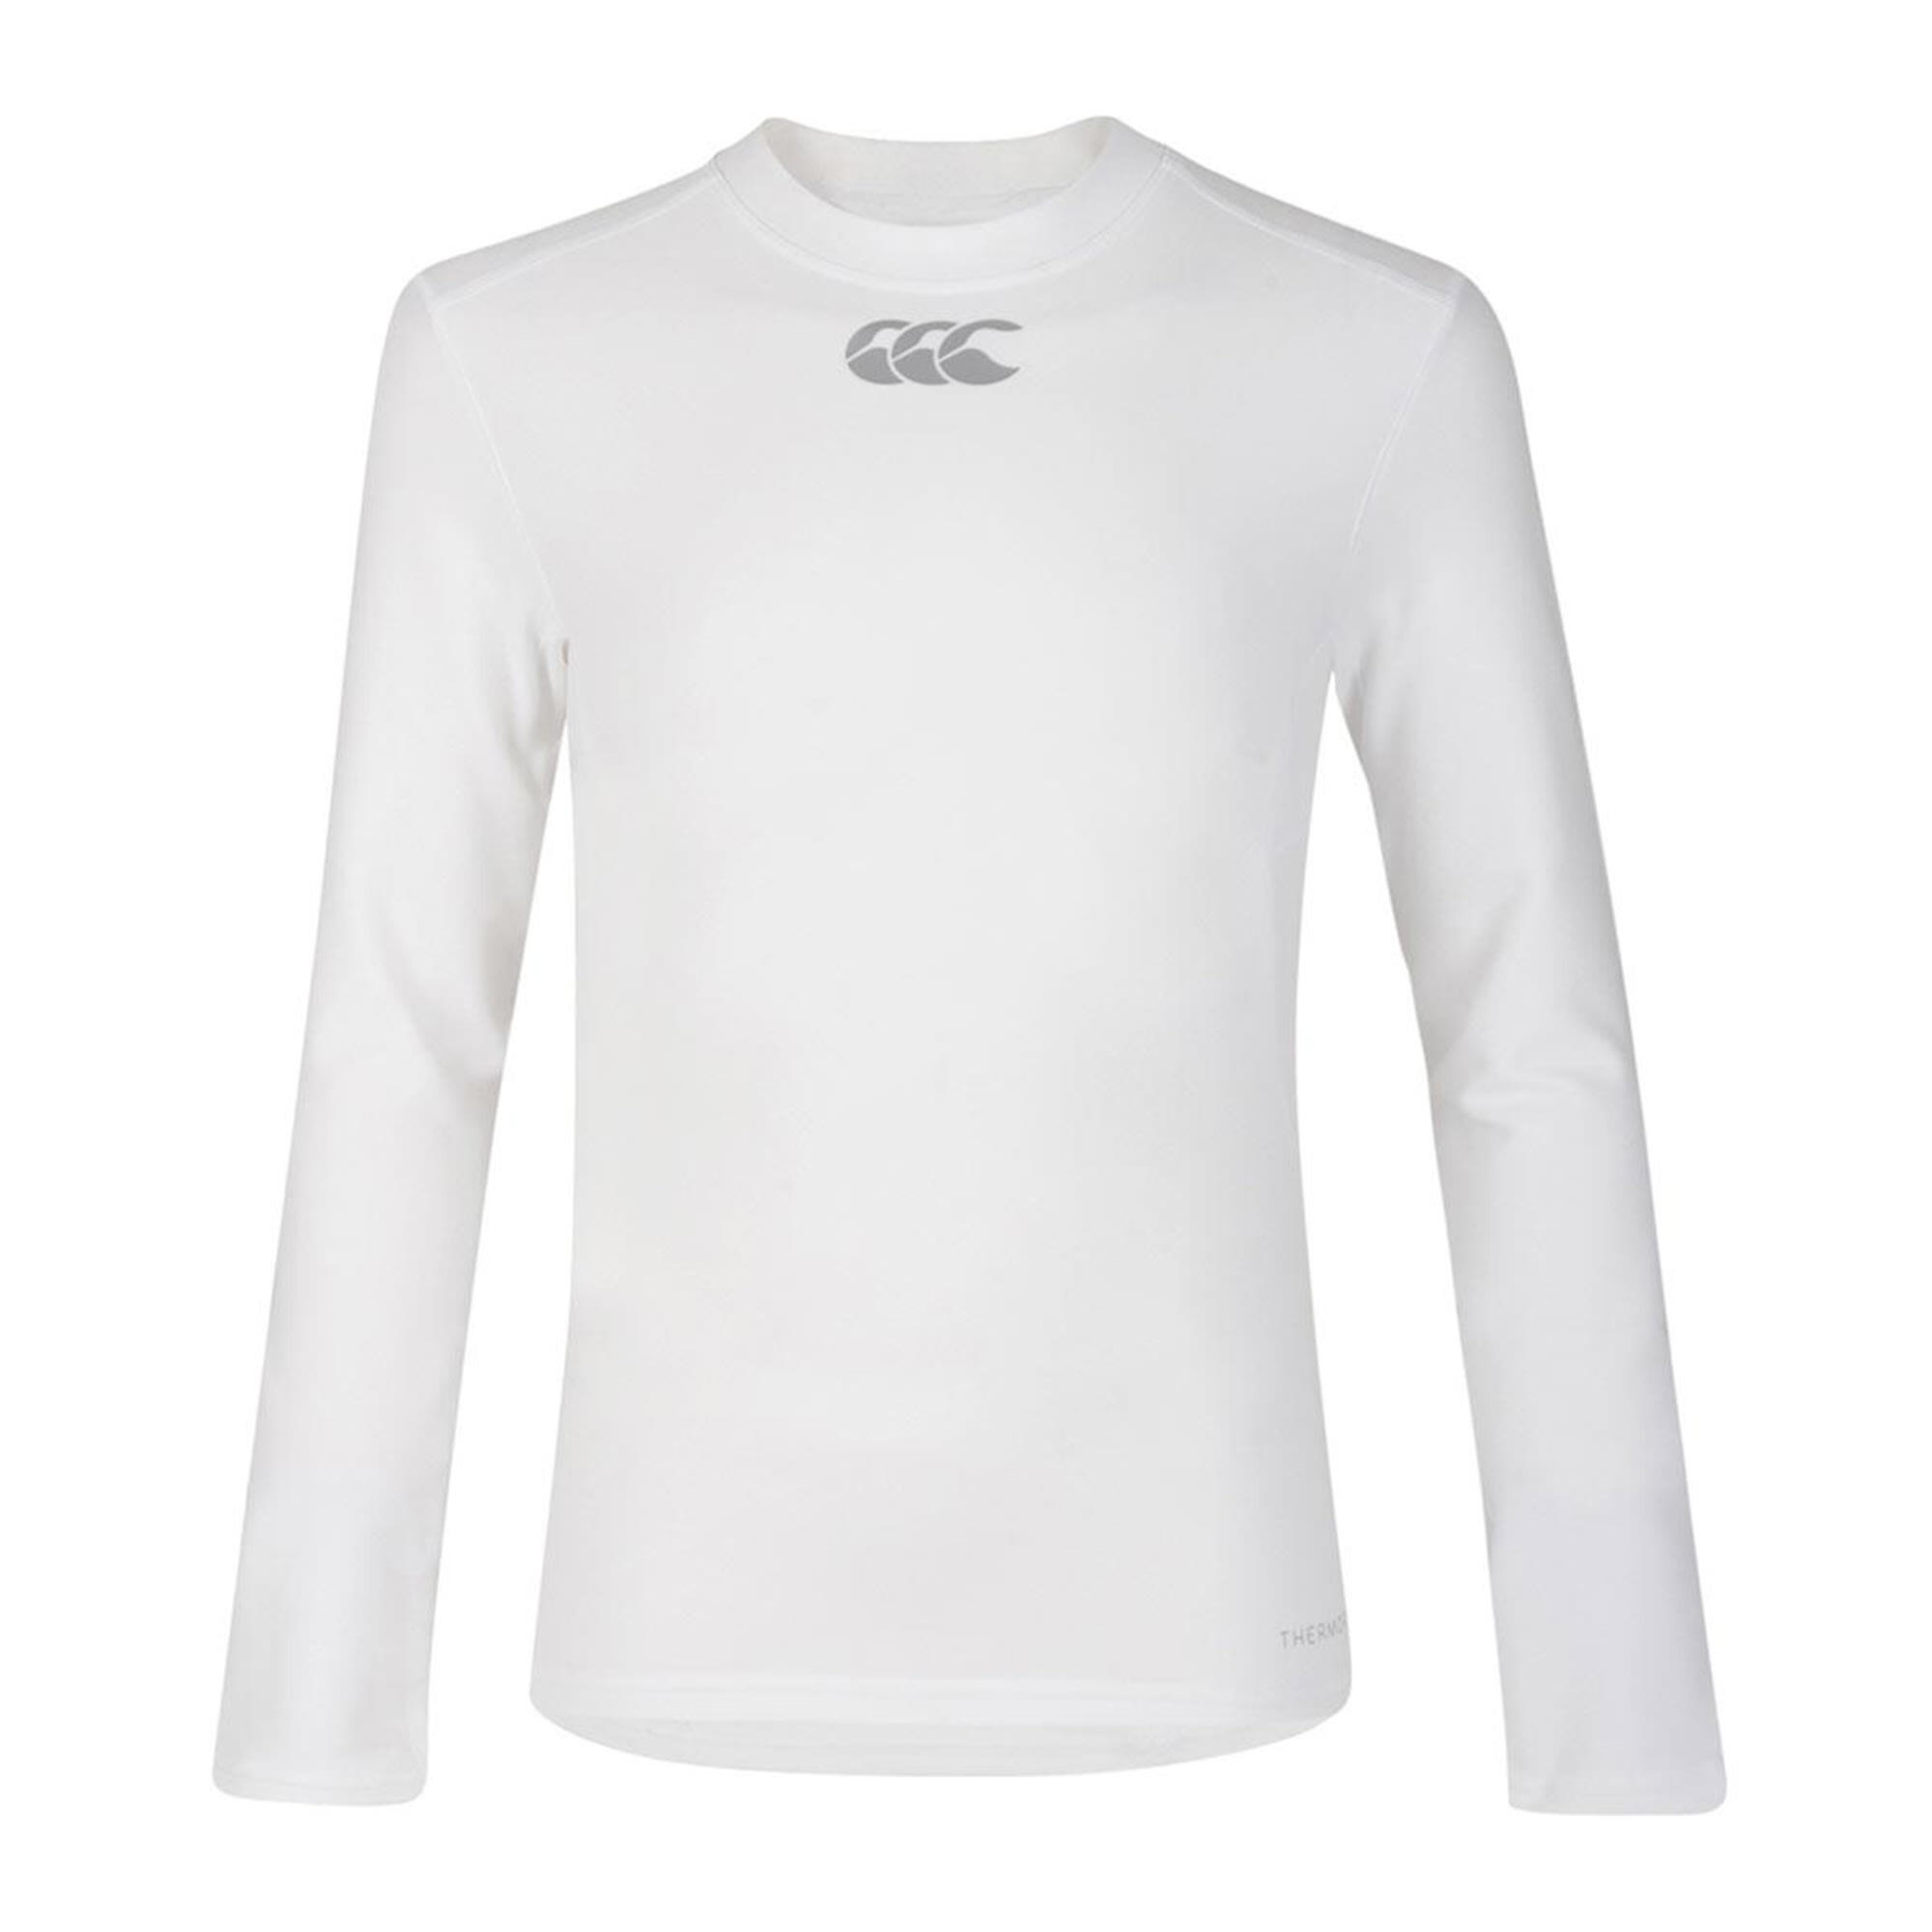 CANTERBURY Childrens/Kids Long Sleeve ThermoReg Base Layer Top (White)